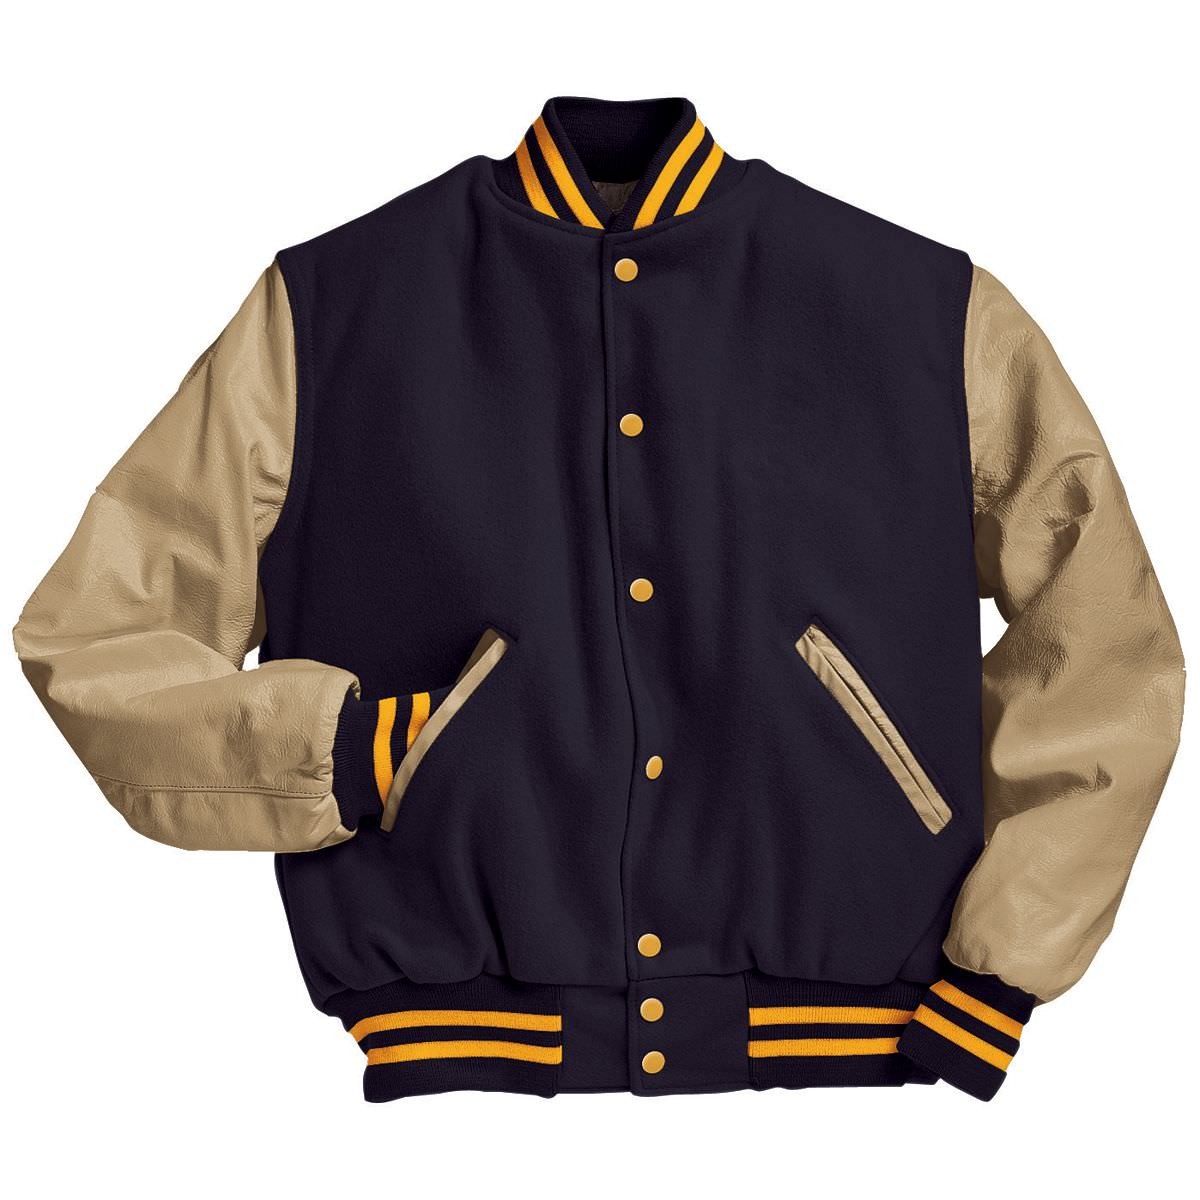 Letterman Jackets for sale in Memphis, Tennessee